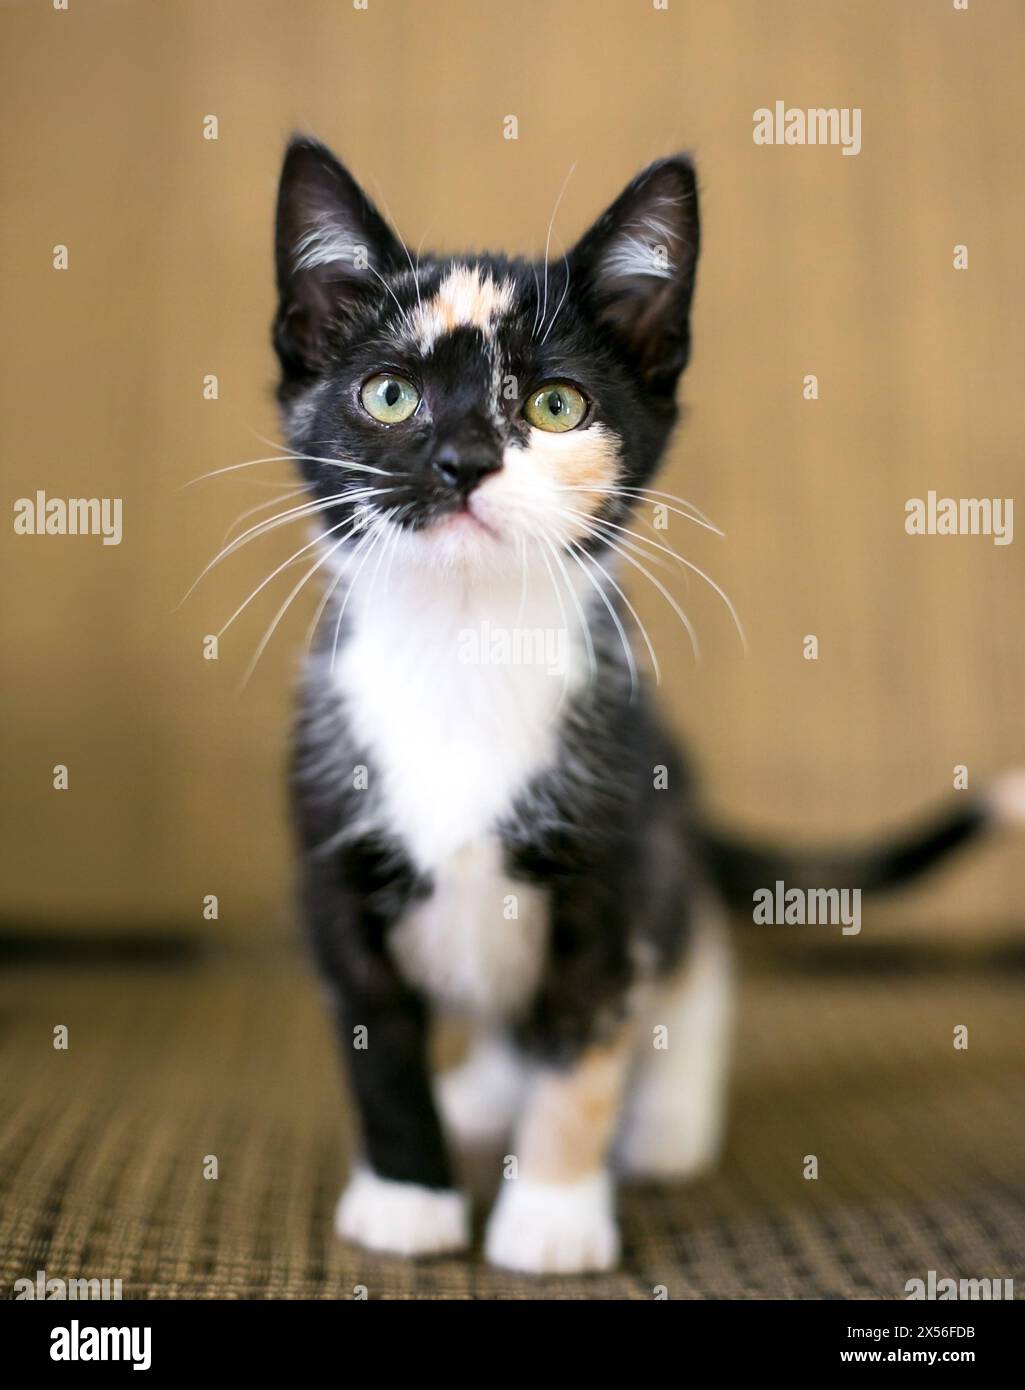 A young Calico shorthair kitten looking at the camera Stock Photo